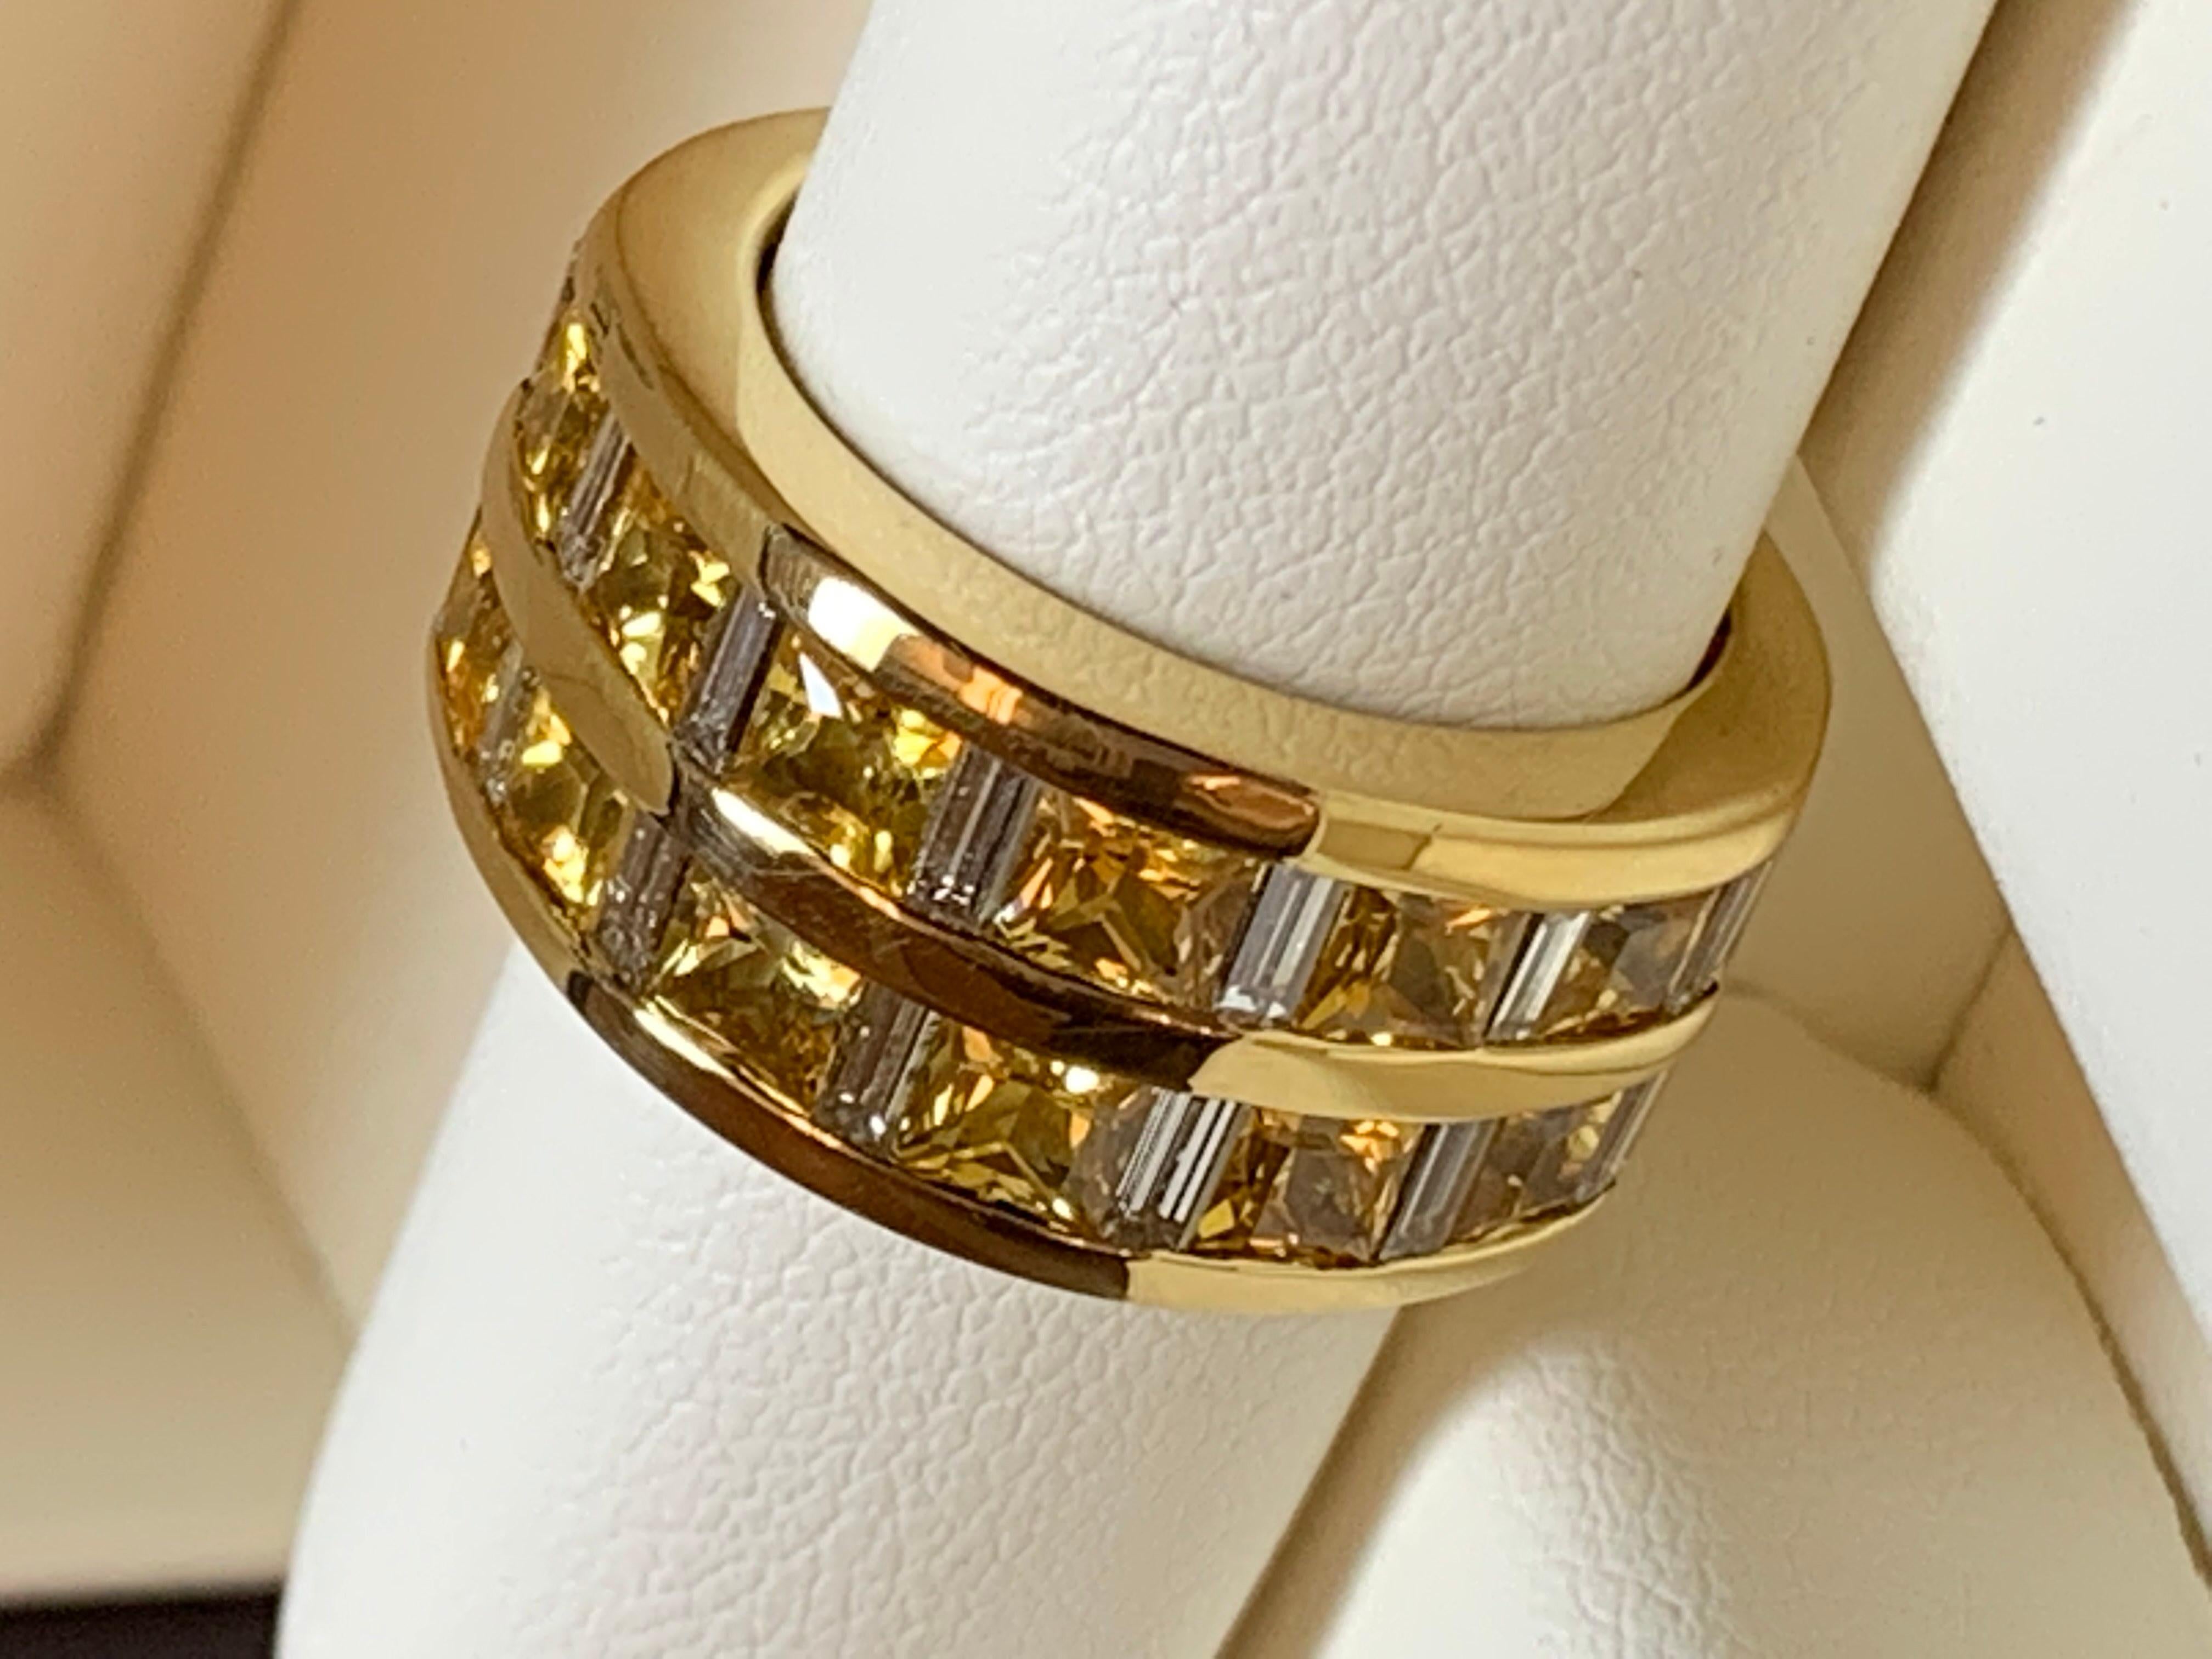 This very unique ring combines 2.96 carats of Princess cut gem quality Yellow Sapphires and .85 carats of Baguette cut white Diamonds set in 18 karat yellow gold. We make this ring as a one row ring as well in many color combinations, and can be